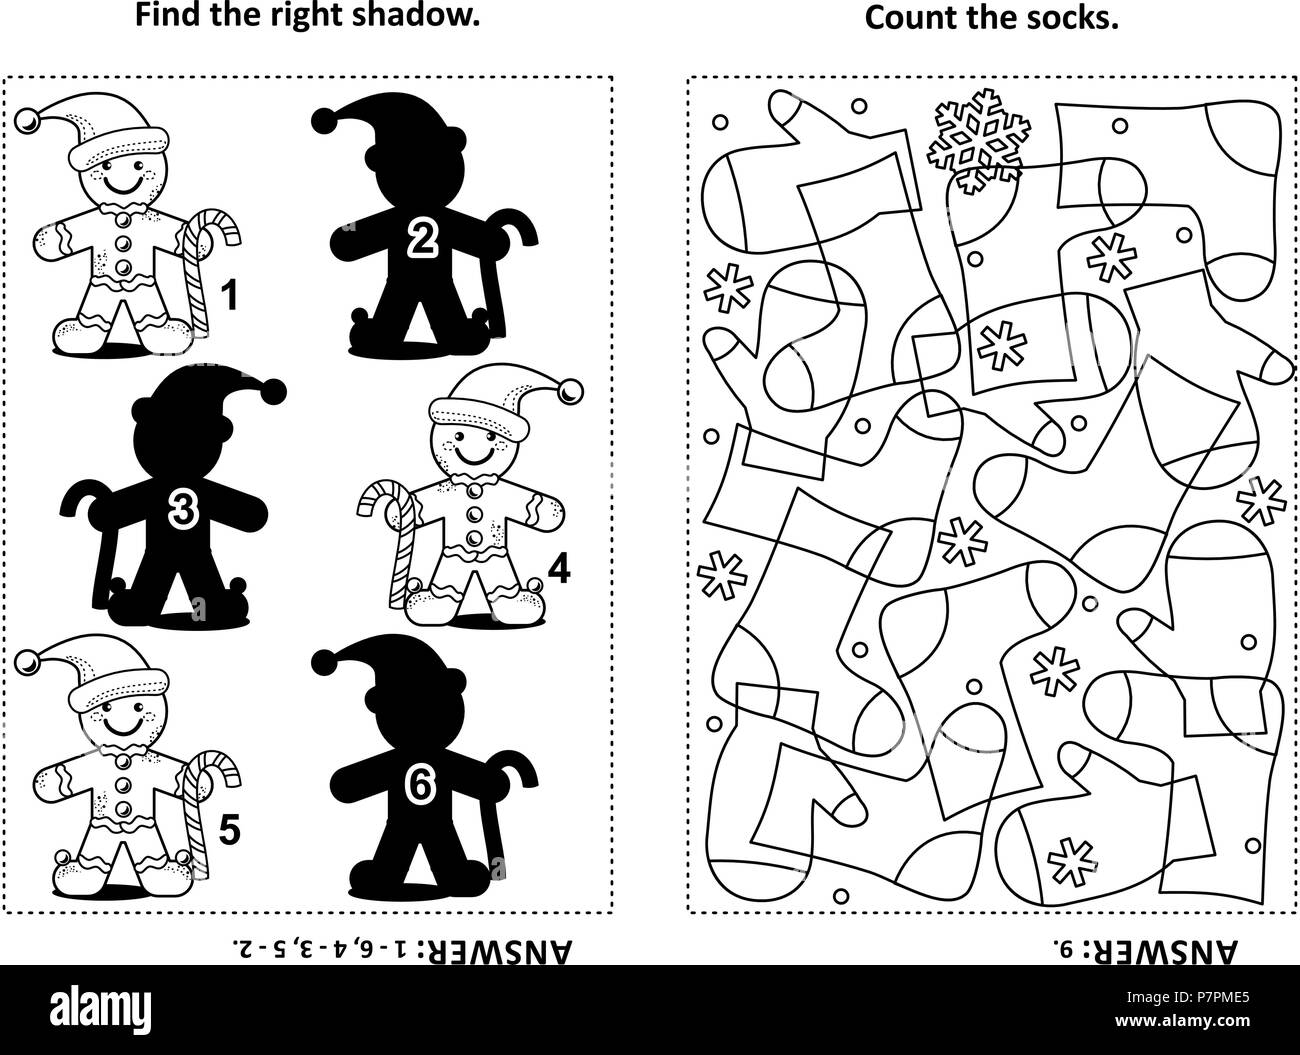 Two visual puzzles and coloring page for kids. Find the right shadow for each picture of ginger man. Count the socks. Black and white. Stock Vector